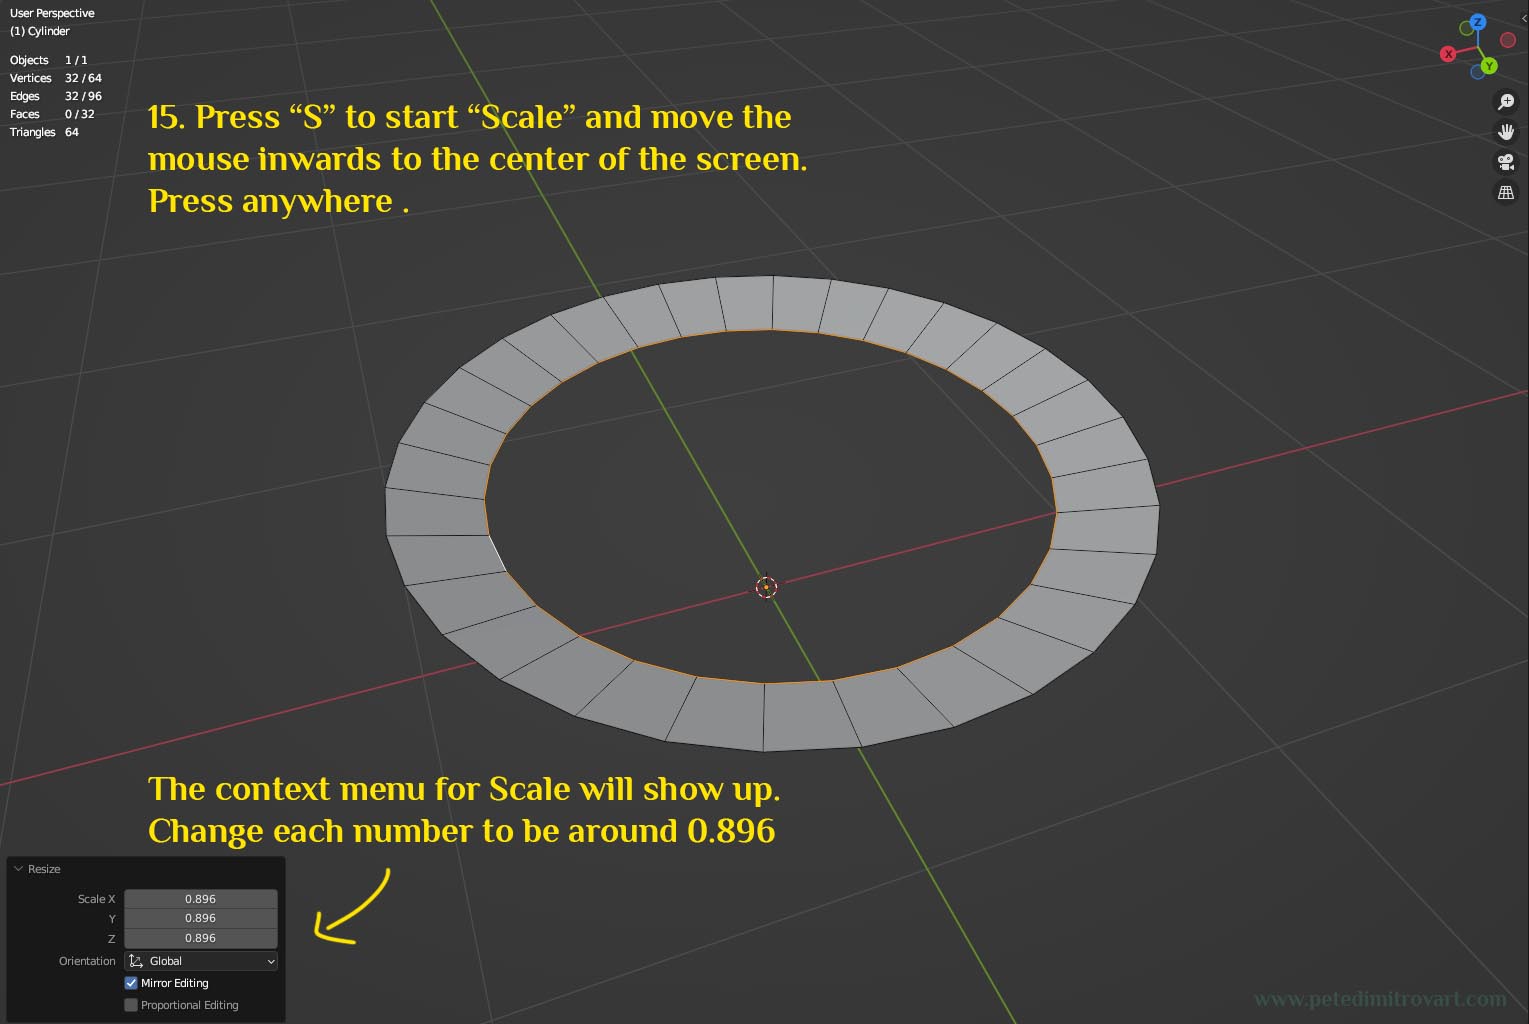 Blender shot showing the same edge loop seen before, scaled in. Yellow text is transcribed in the paragraph below the image.